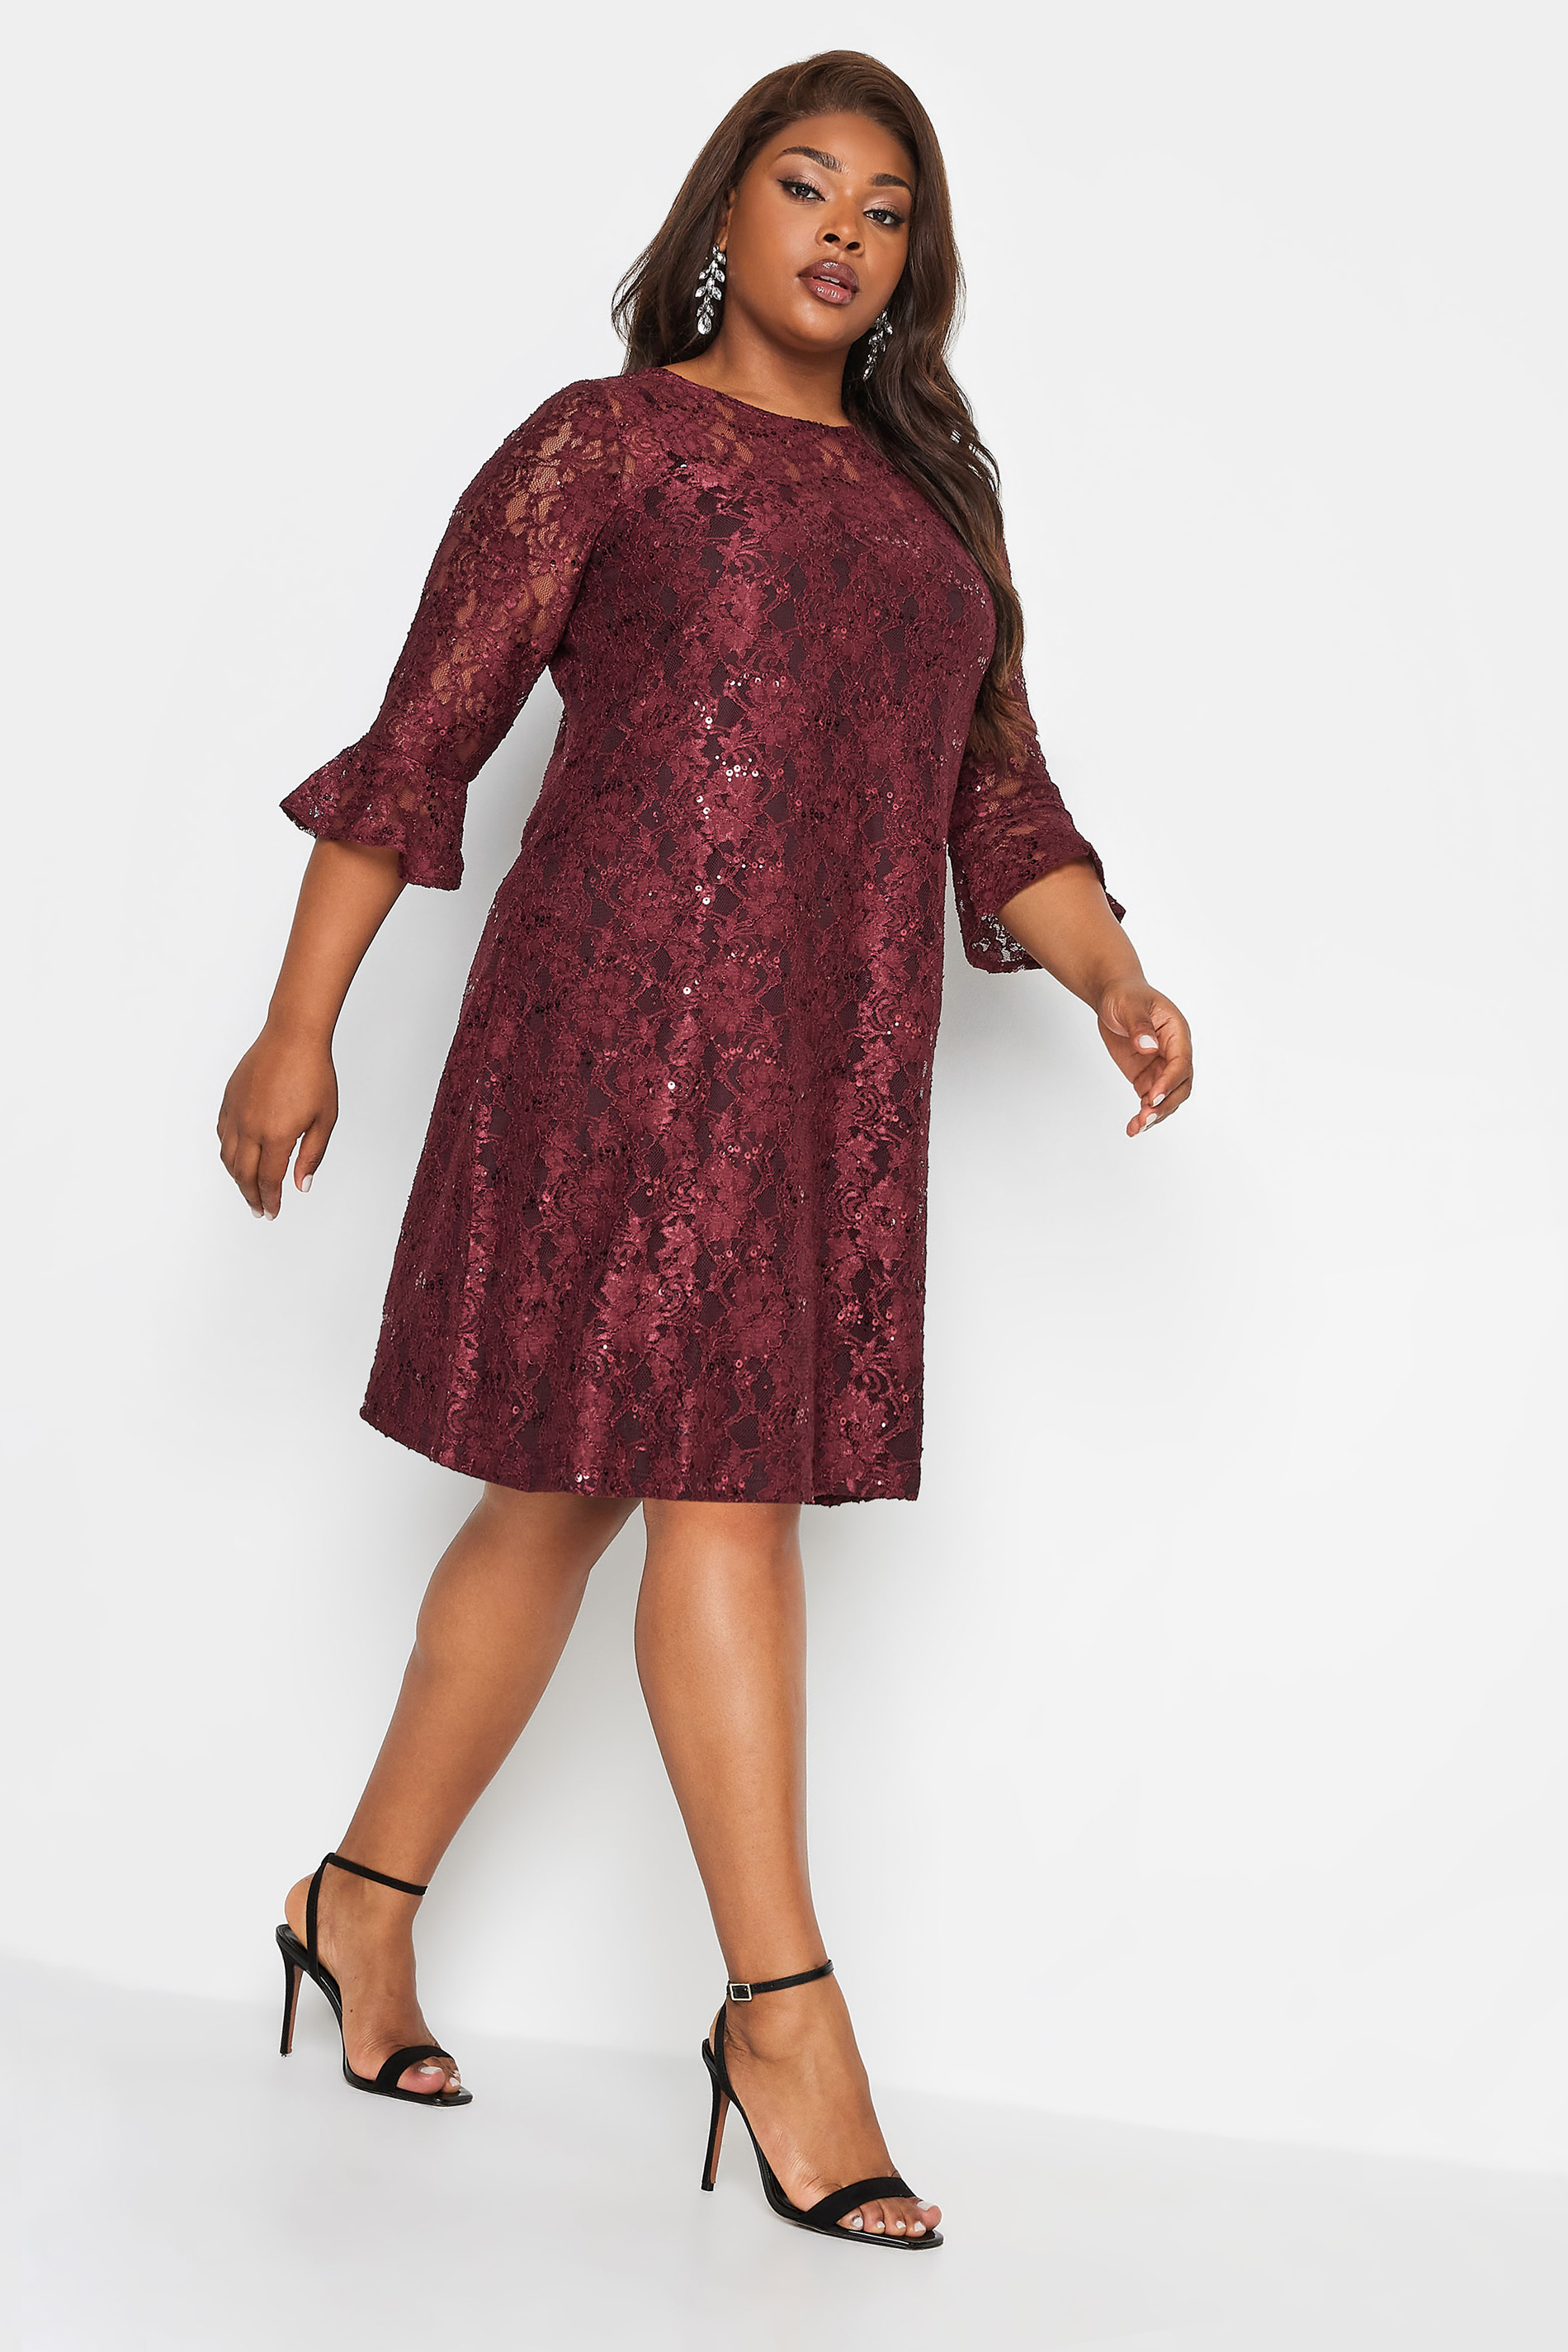 YOURS Plus Size Burgundy Red Lace Sequin Embellished Swing Dress | Yours Clothing 1